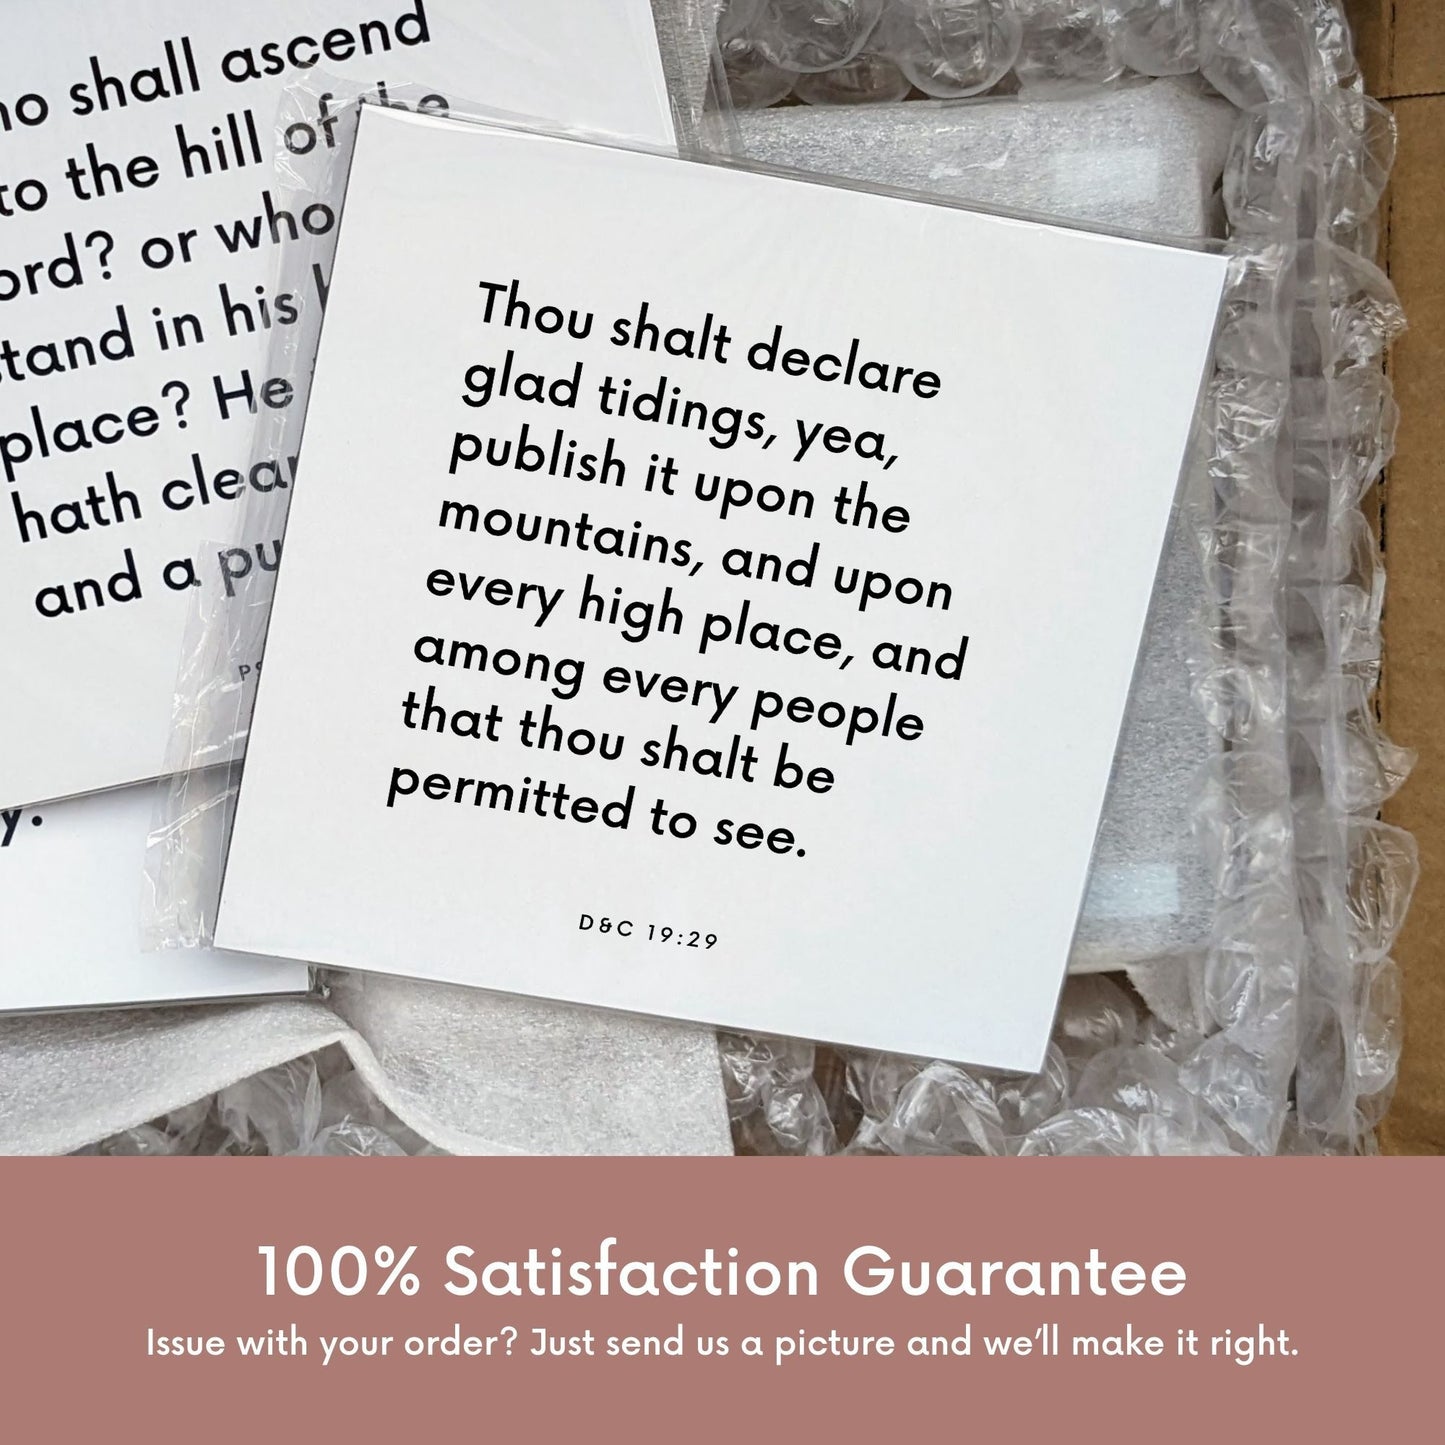 Shipping materials for scripture tile of D&C 19:29 - "Thou shalt declare glad tidings among every people"